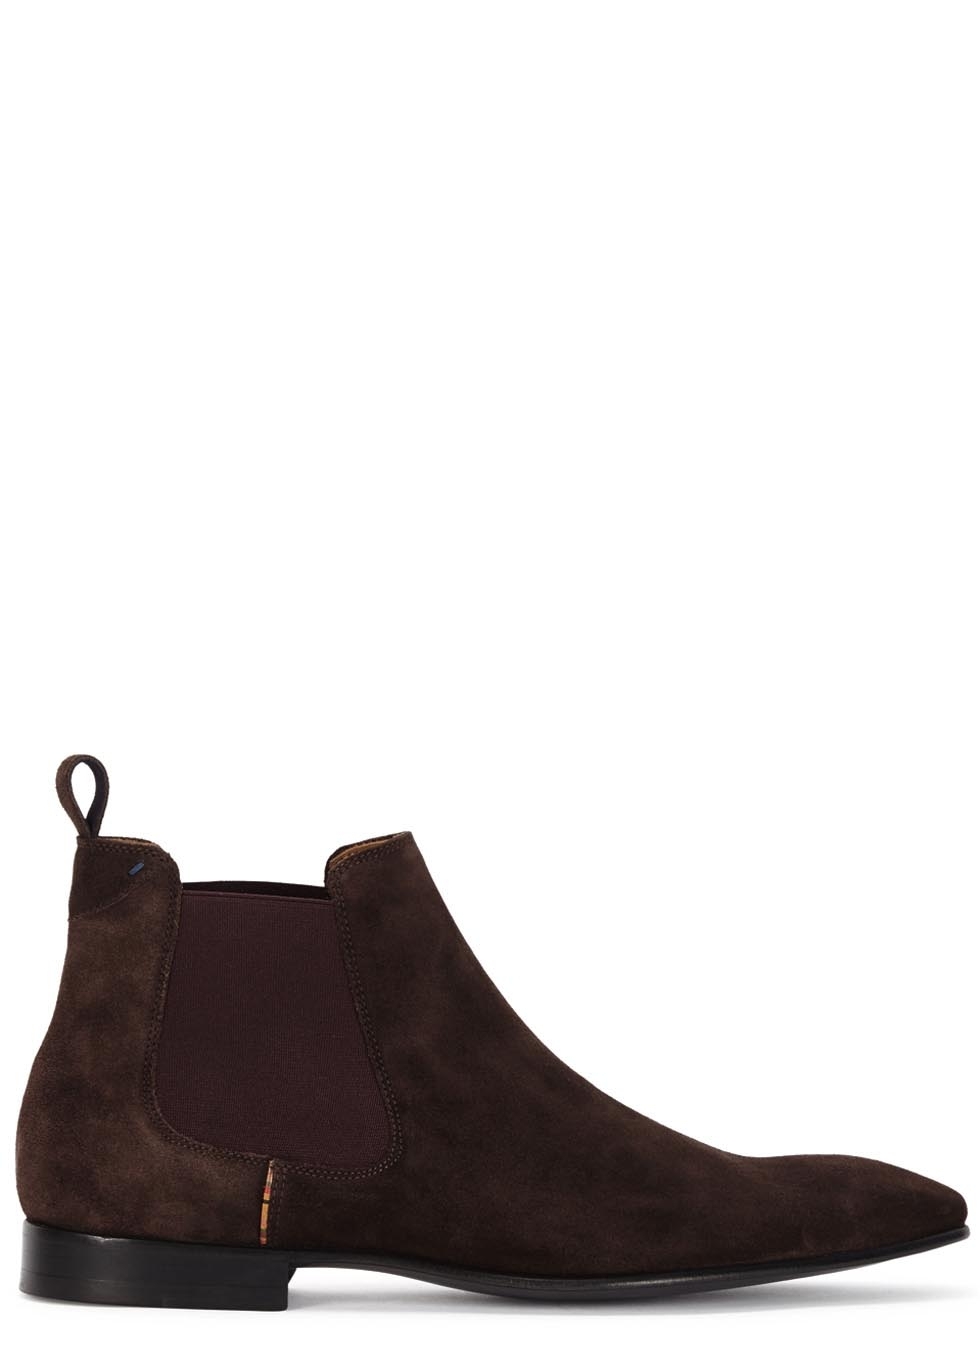 Falconer brown suede boots